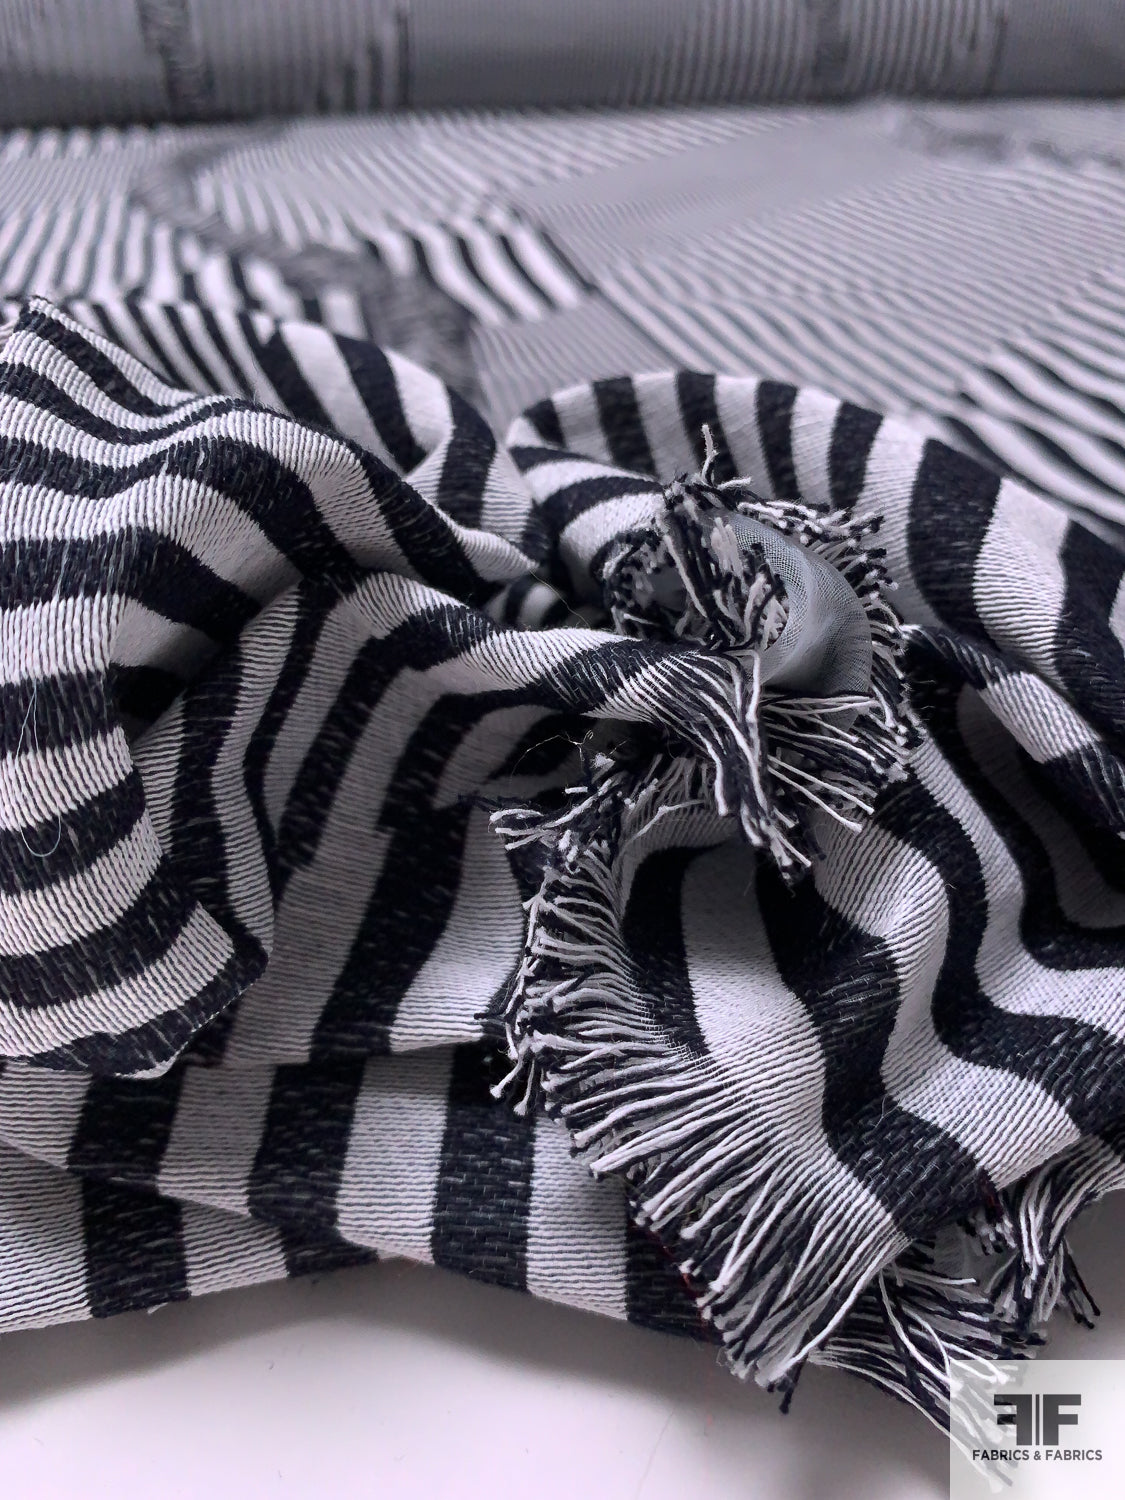 Black and White and Dyed All Over Yarn